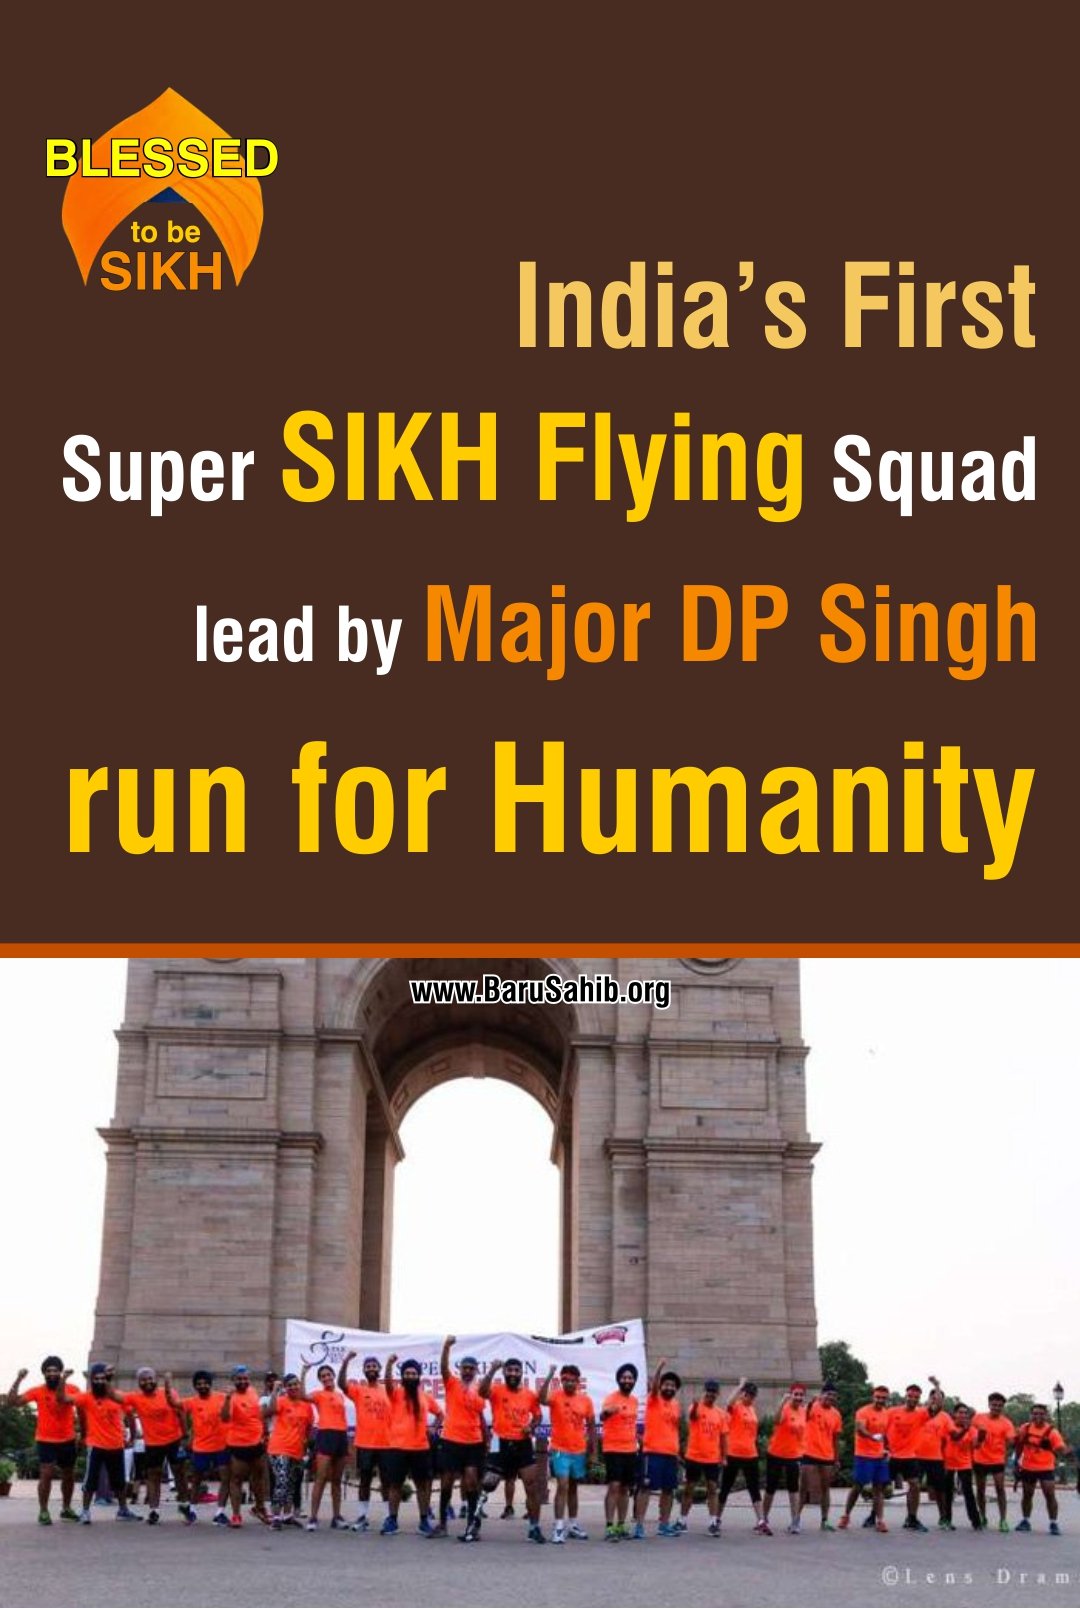 India’s First Super SIKH Flying Squad lead by Major DP Singh run for